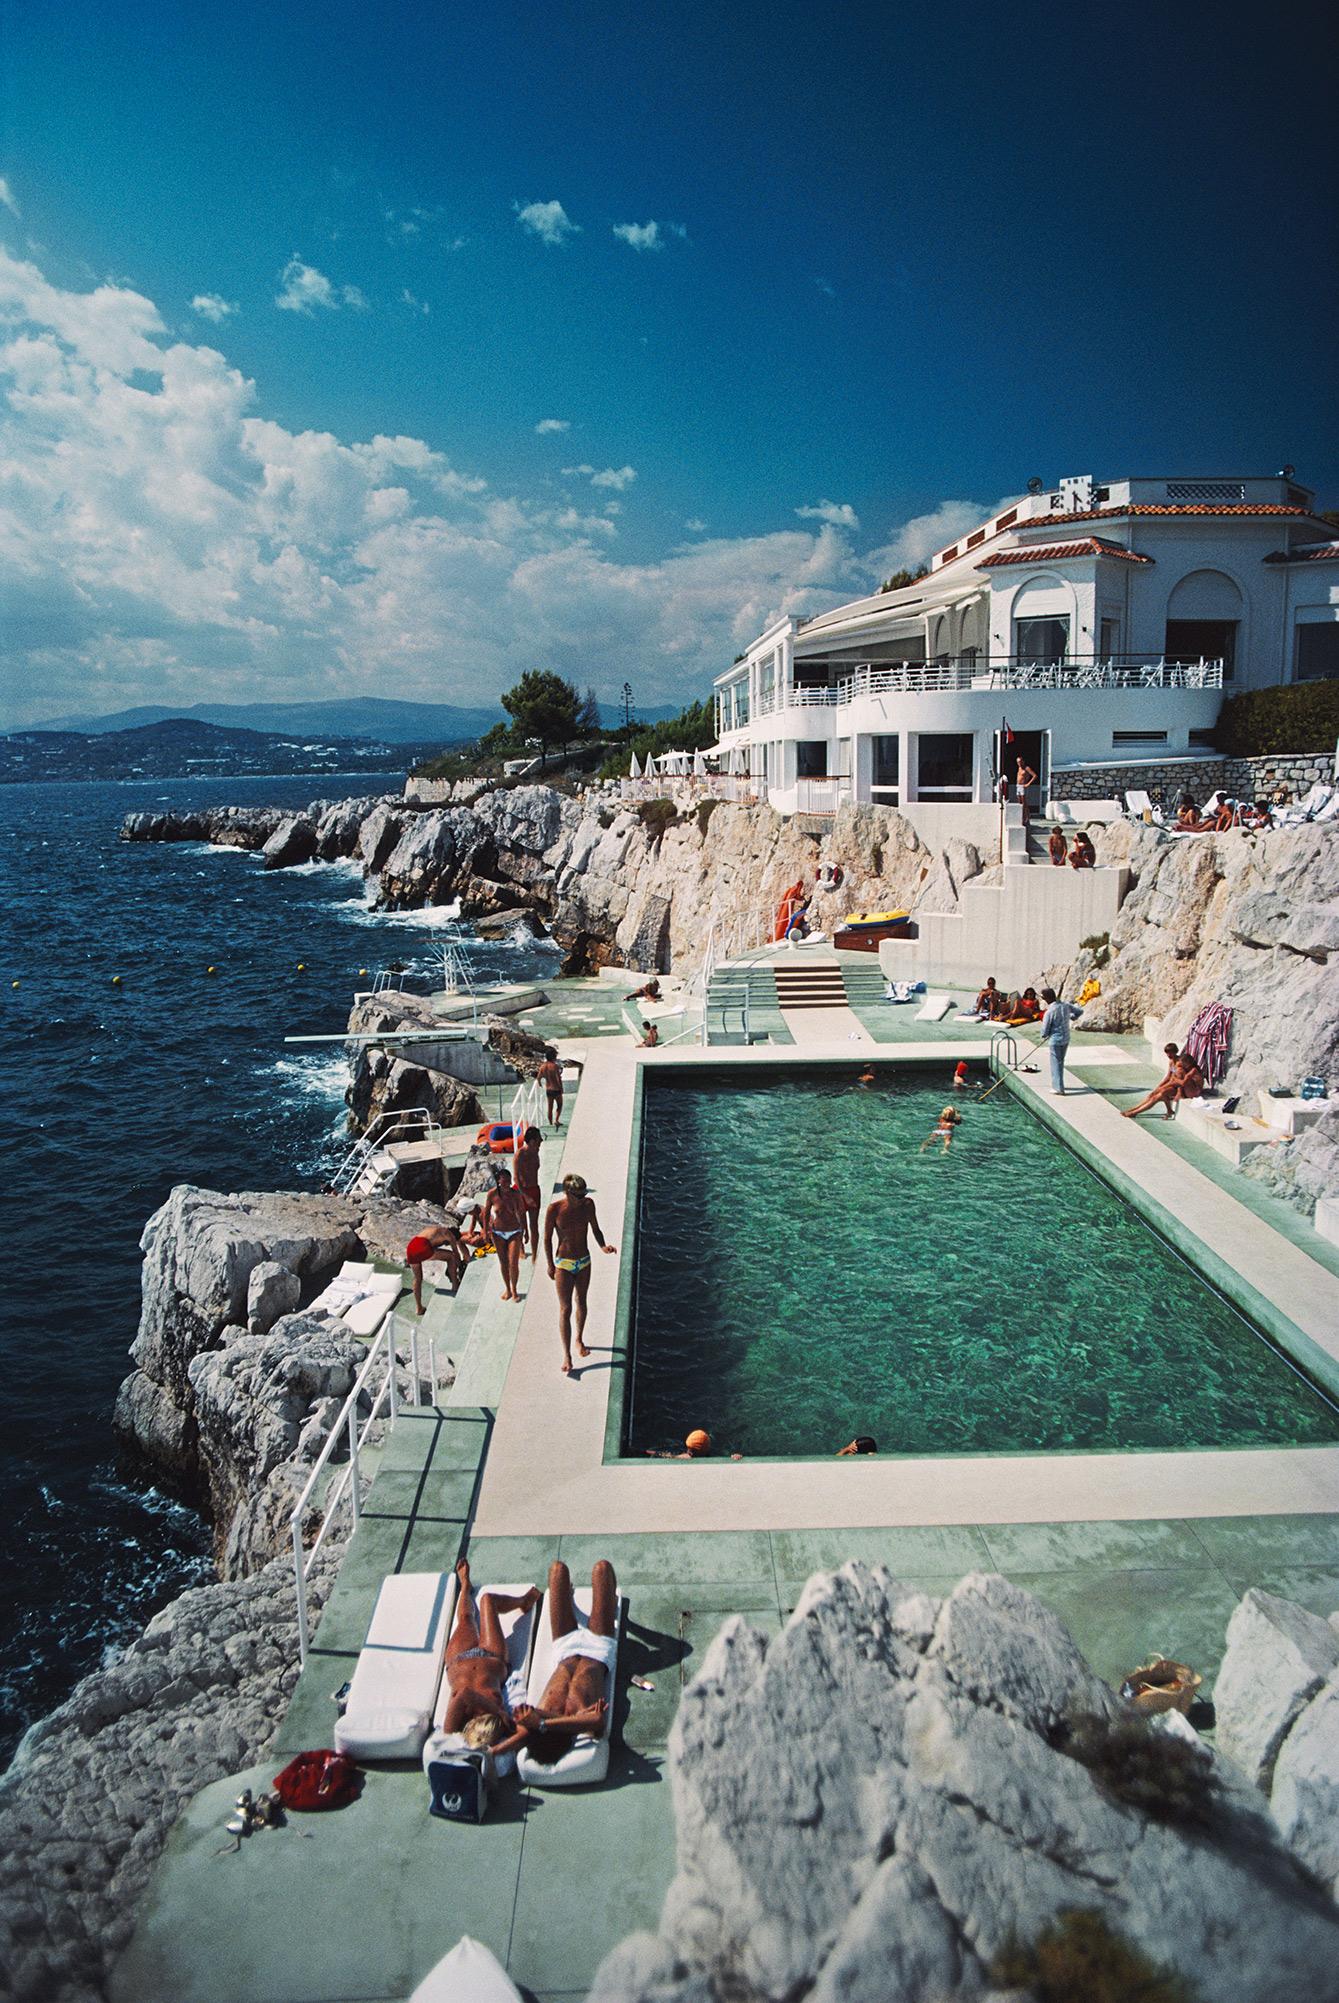 'Hotel du Cap Eden-Roc' 1976 Slim Aarons Limited Estate Edition

Guests by the pool at the Hotel du Cap Eden-Roc, Antibes, France, August 1976. 

Produced from the original transparency
Certificate of authenticity supplied 
30x40 inches / 76 x 102